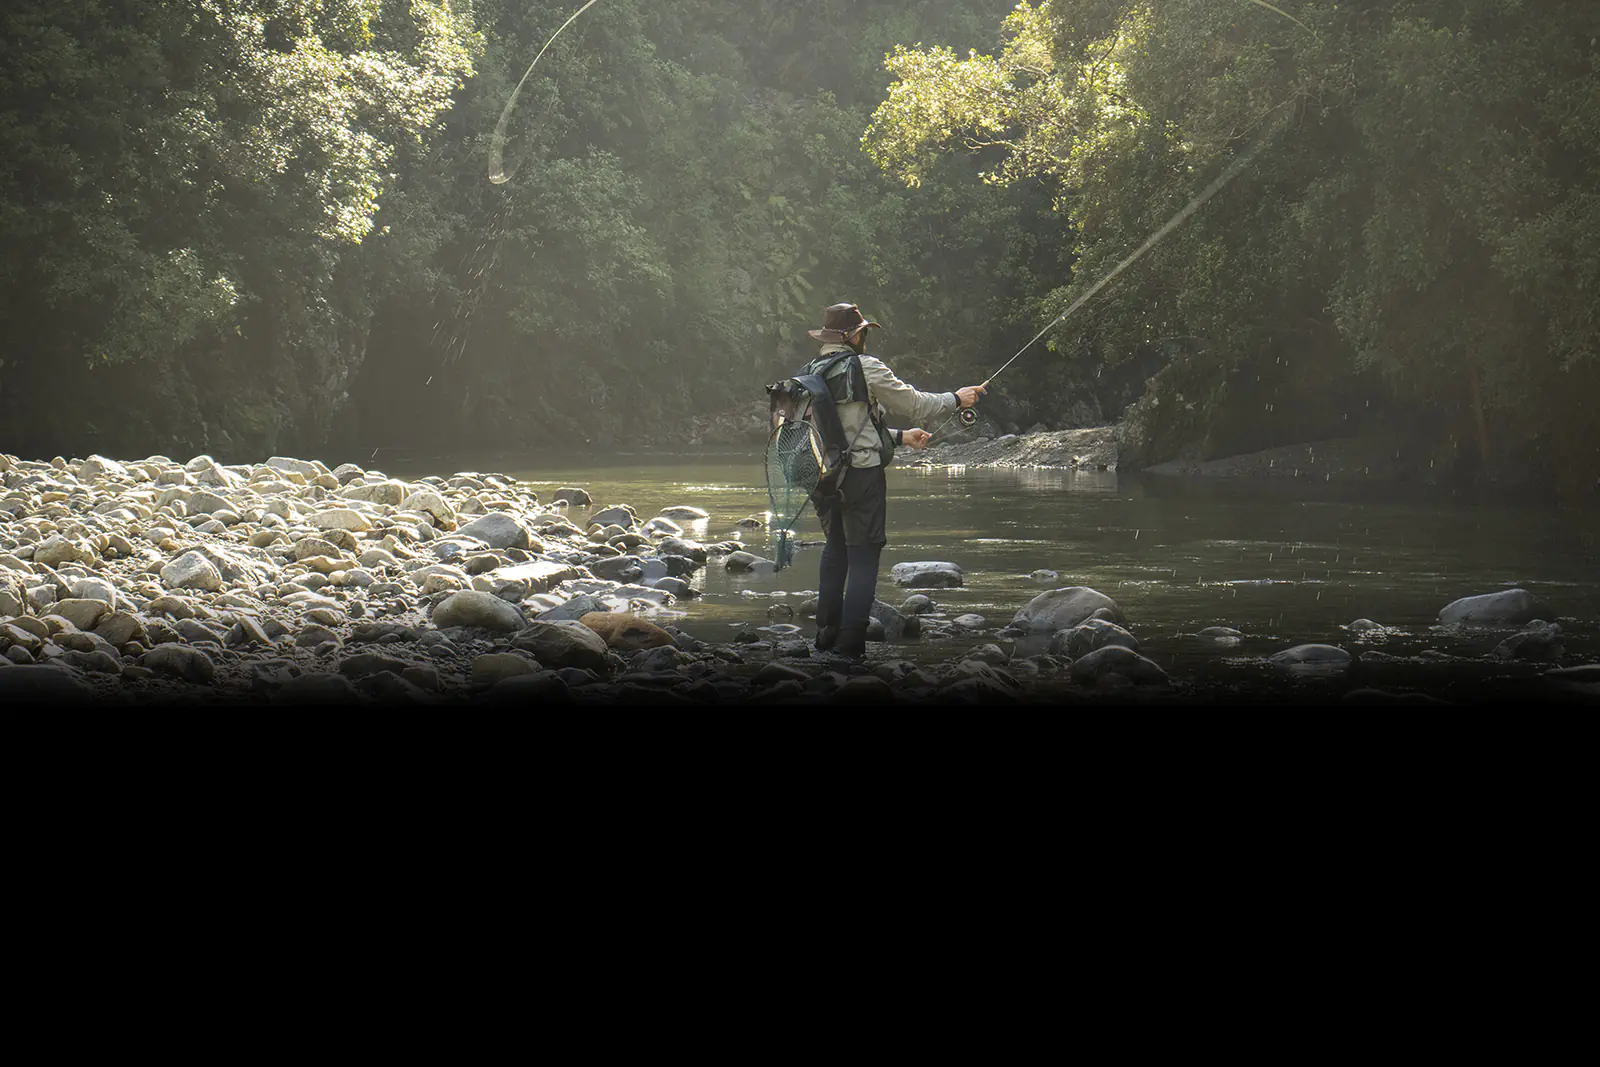 A man standing near the rocky banks of a river while fly fishing near Bryson City, North Carolina.